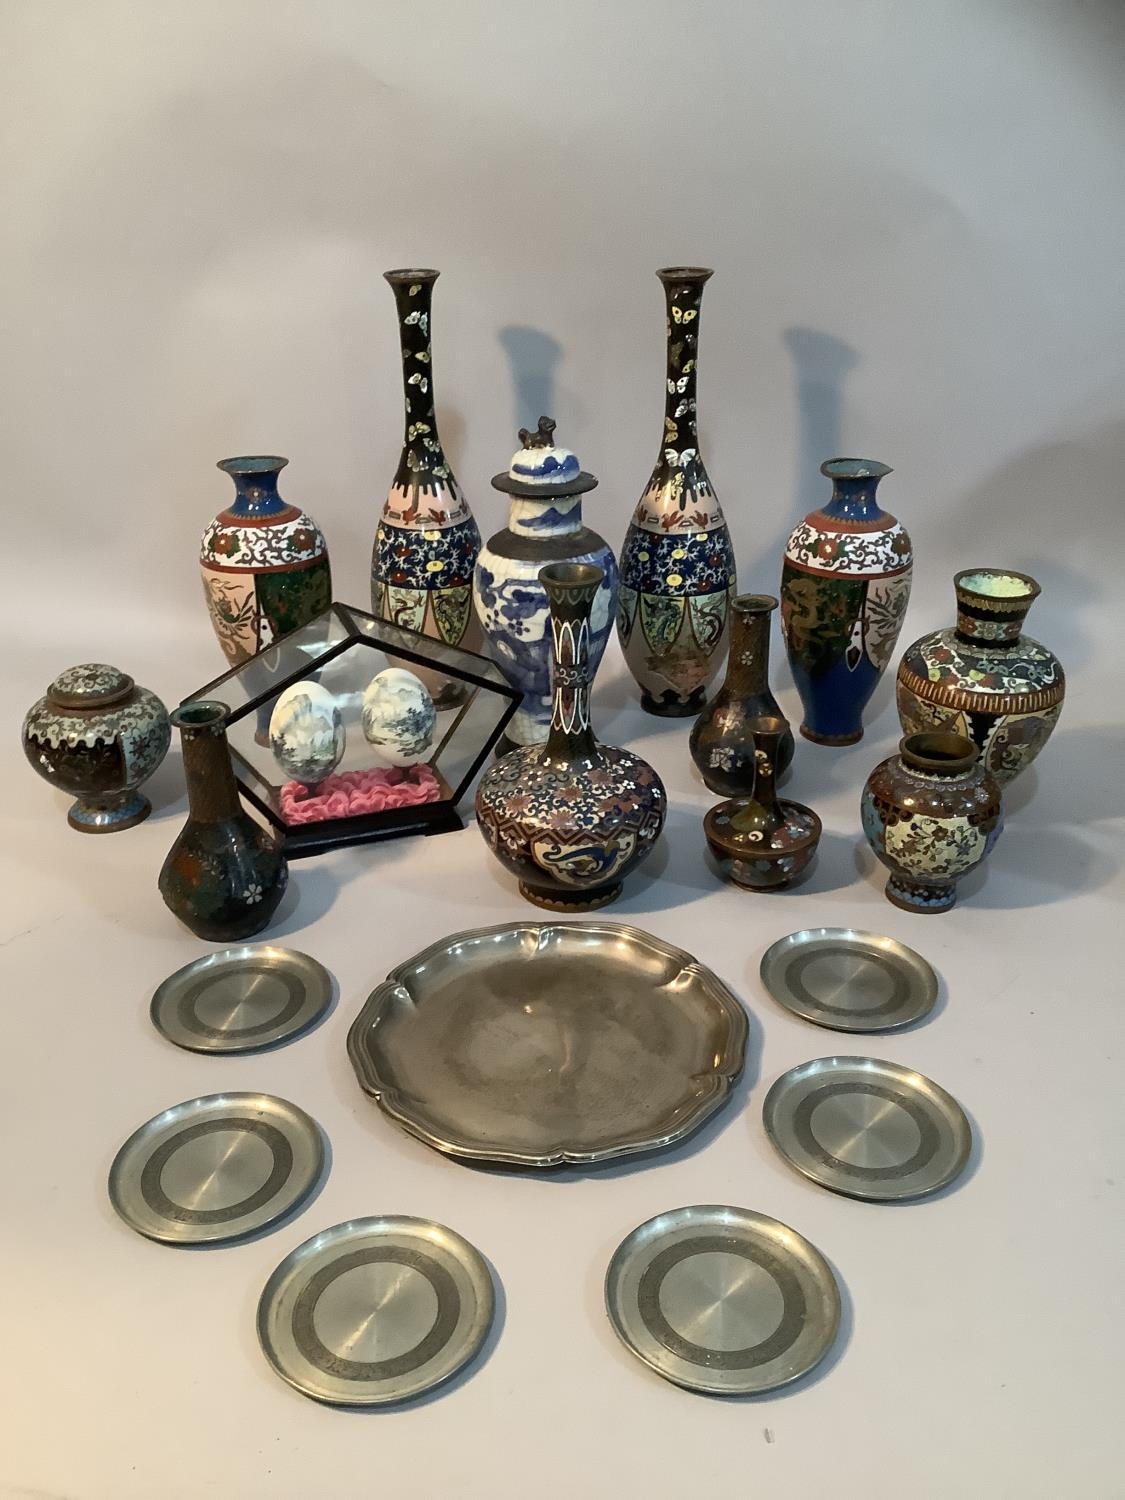 A collection of Chinese Cloisonné ware, including two pairs of vases, odd vases, vase and cover etc.